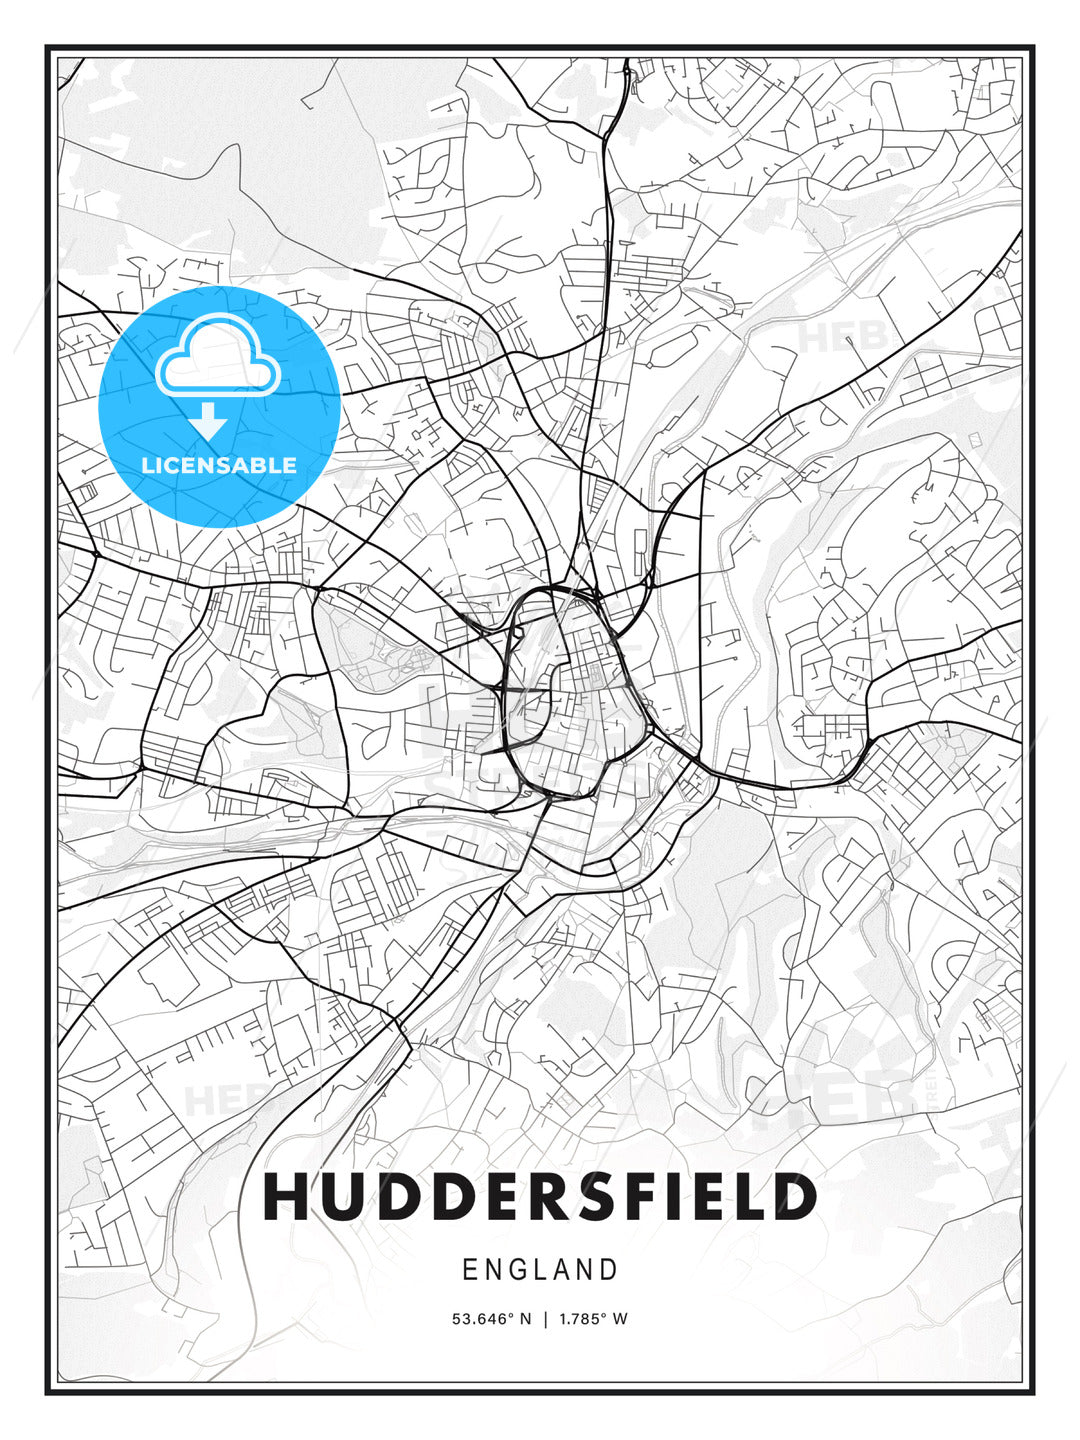 Huddersfield, England, Modern Print Template in Various Formats - HEBSTREITS Sketches